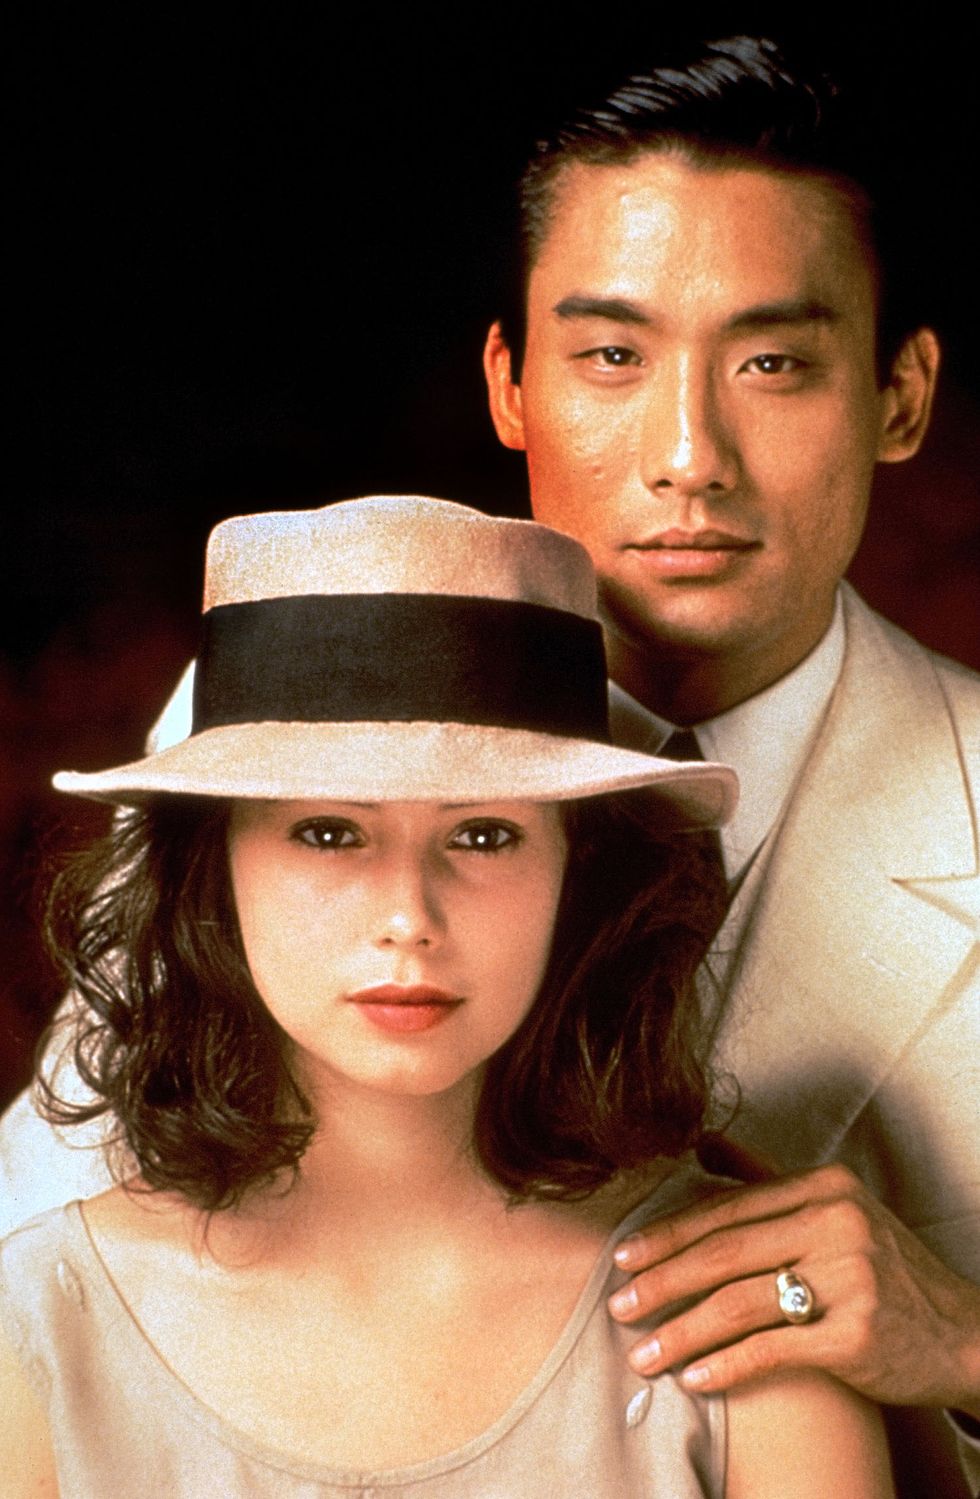 the lover, aka l'amant, jane march, tony leung, 1992, c mgmcourtesy everett collection